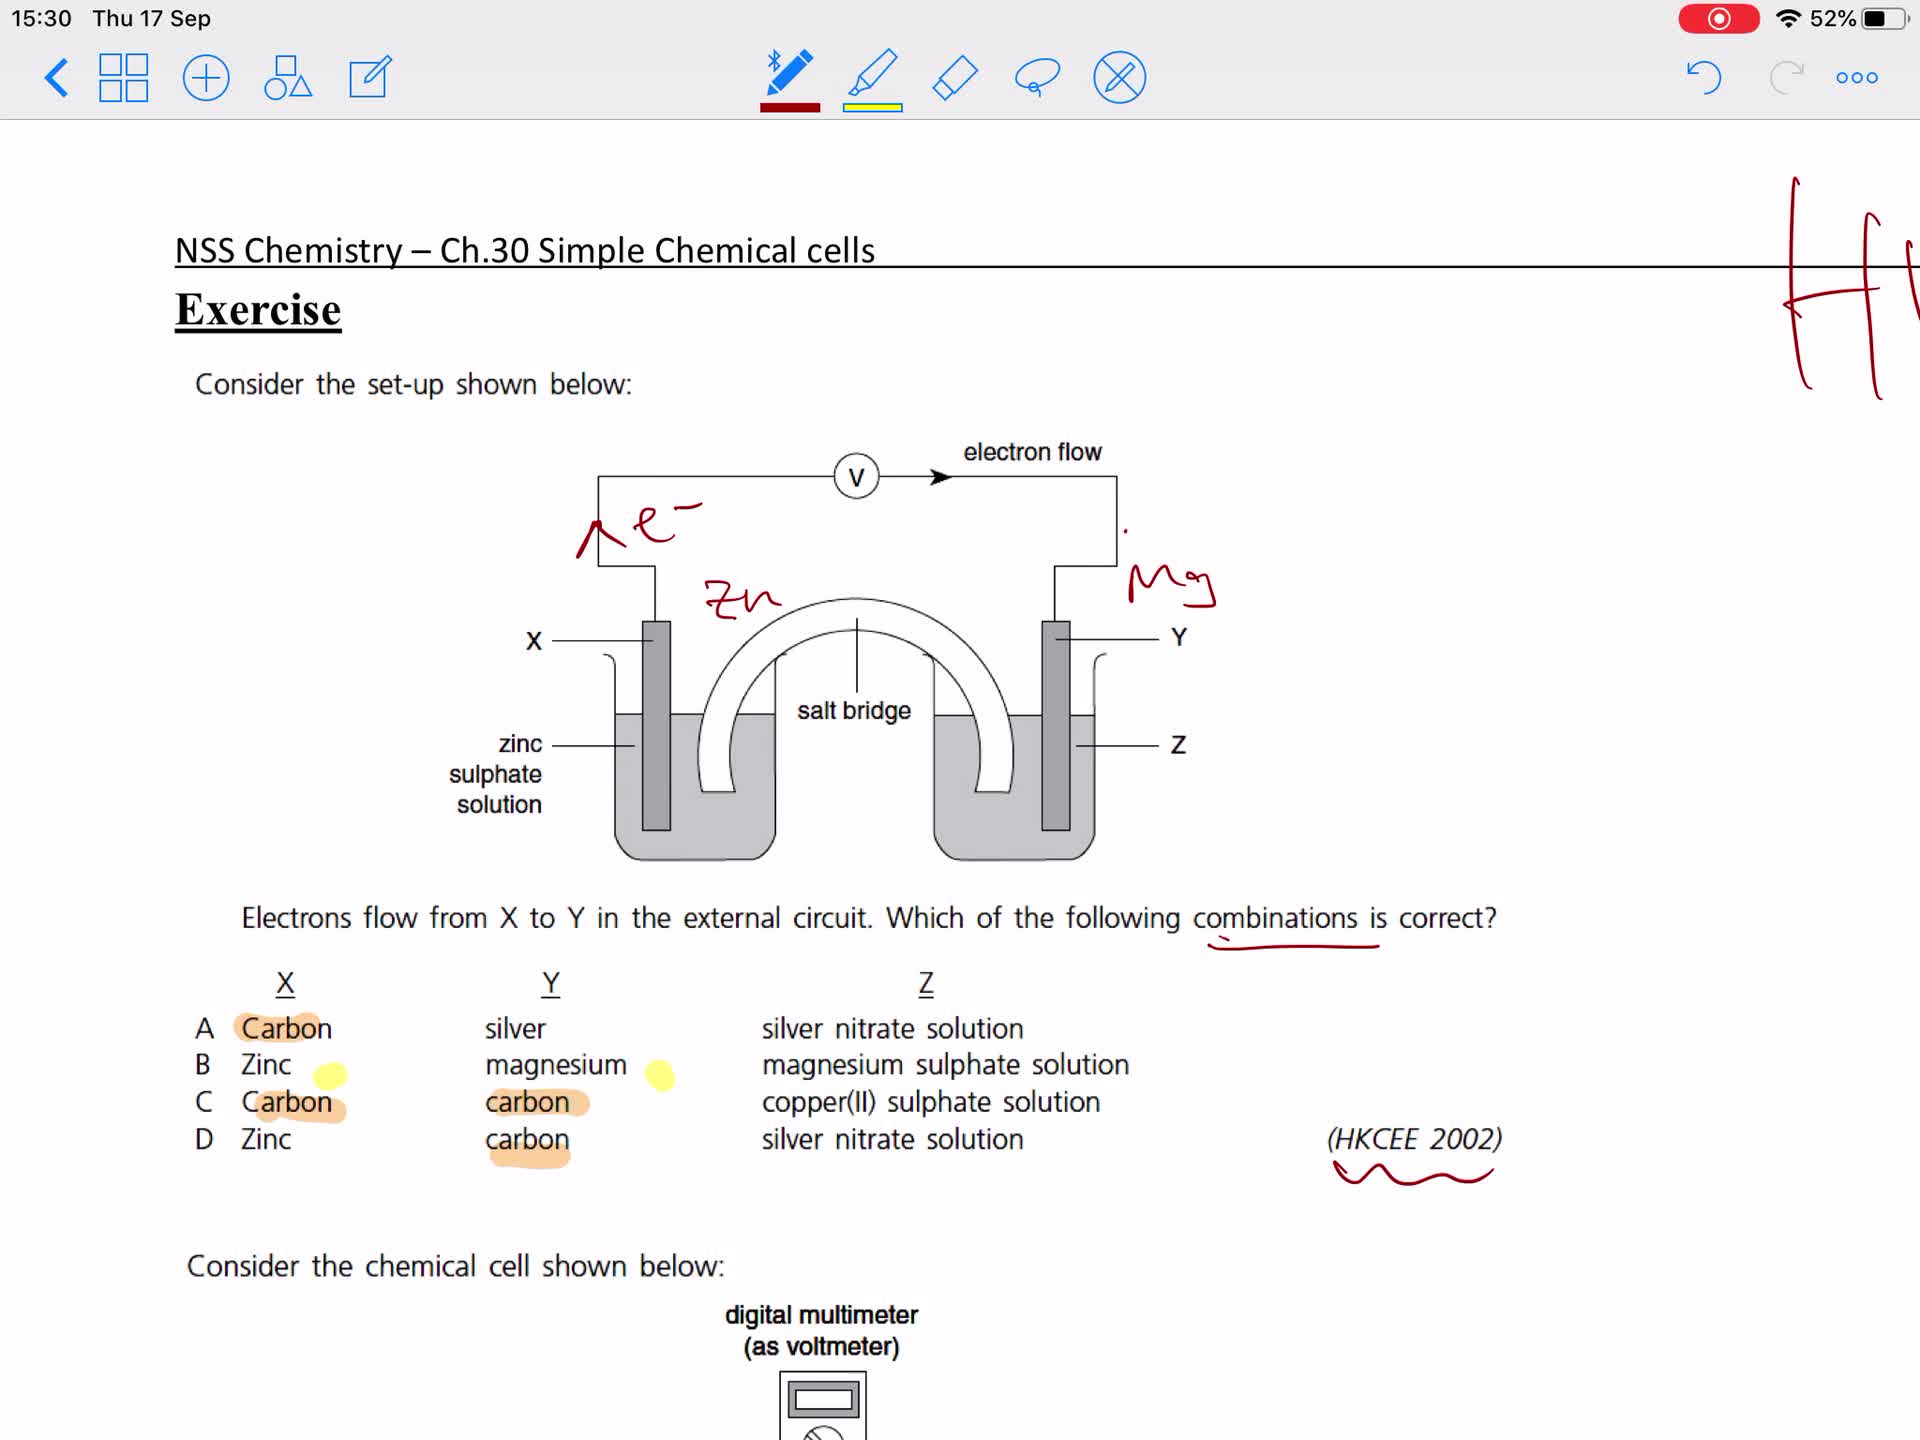 Sample questions of chemical cell